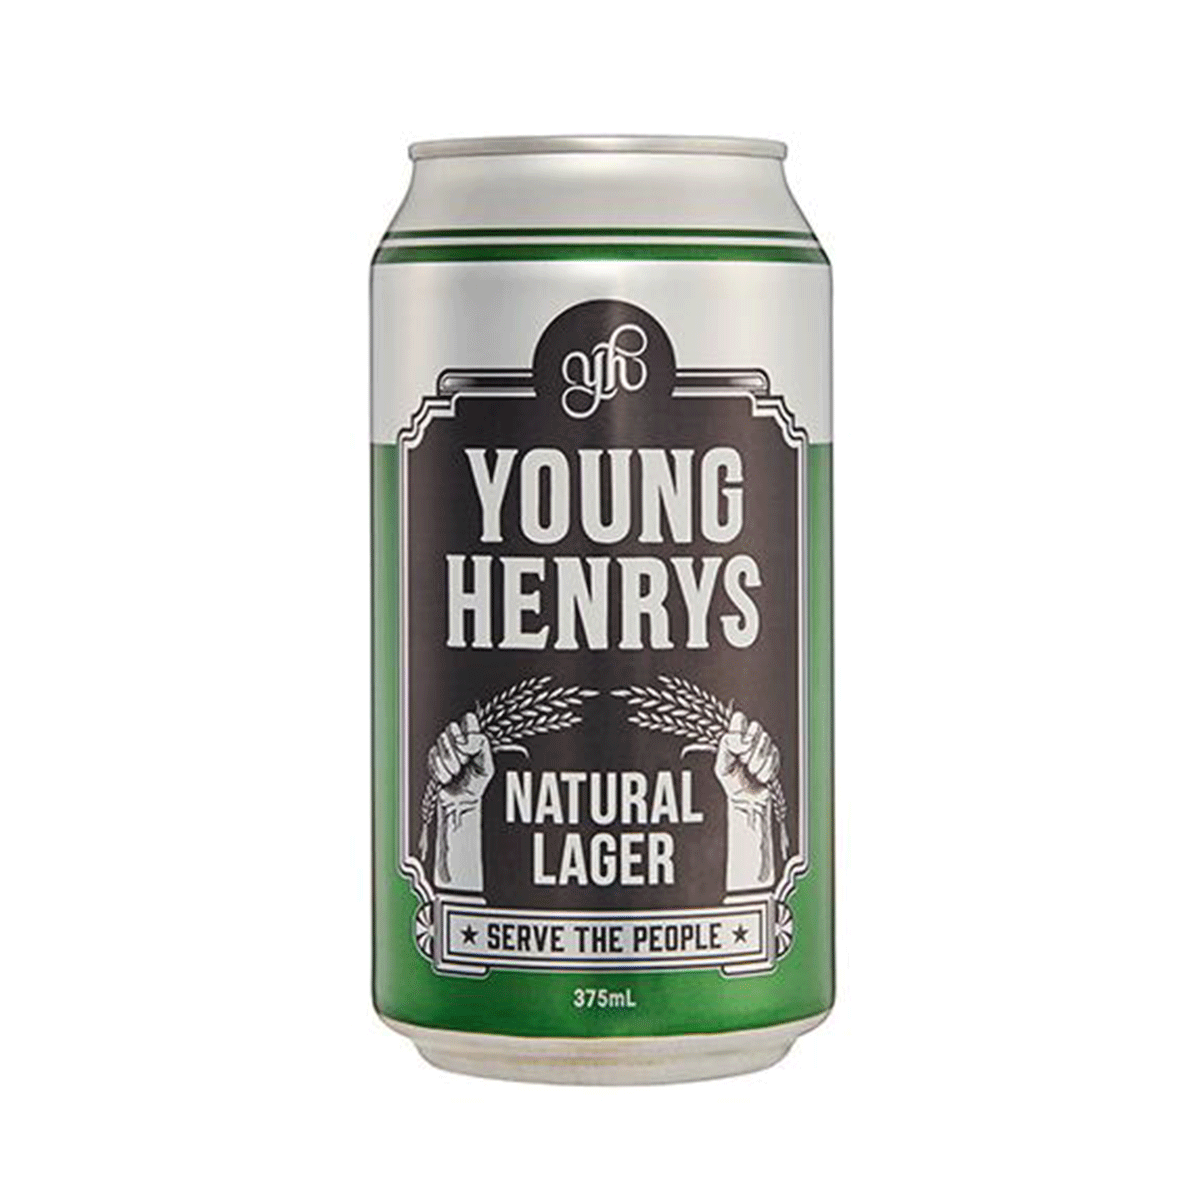 Young Henrys Natural Lager Cans